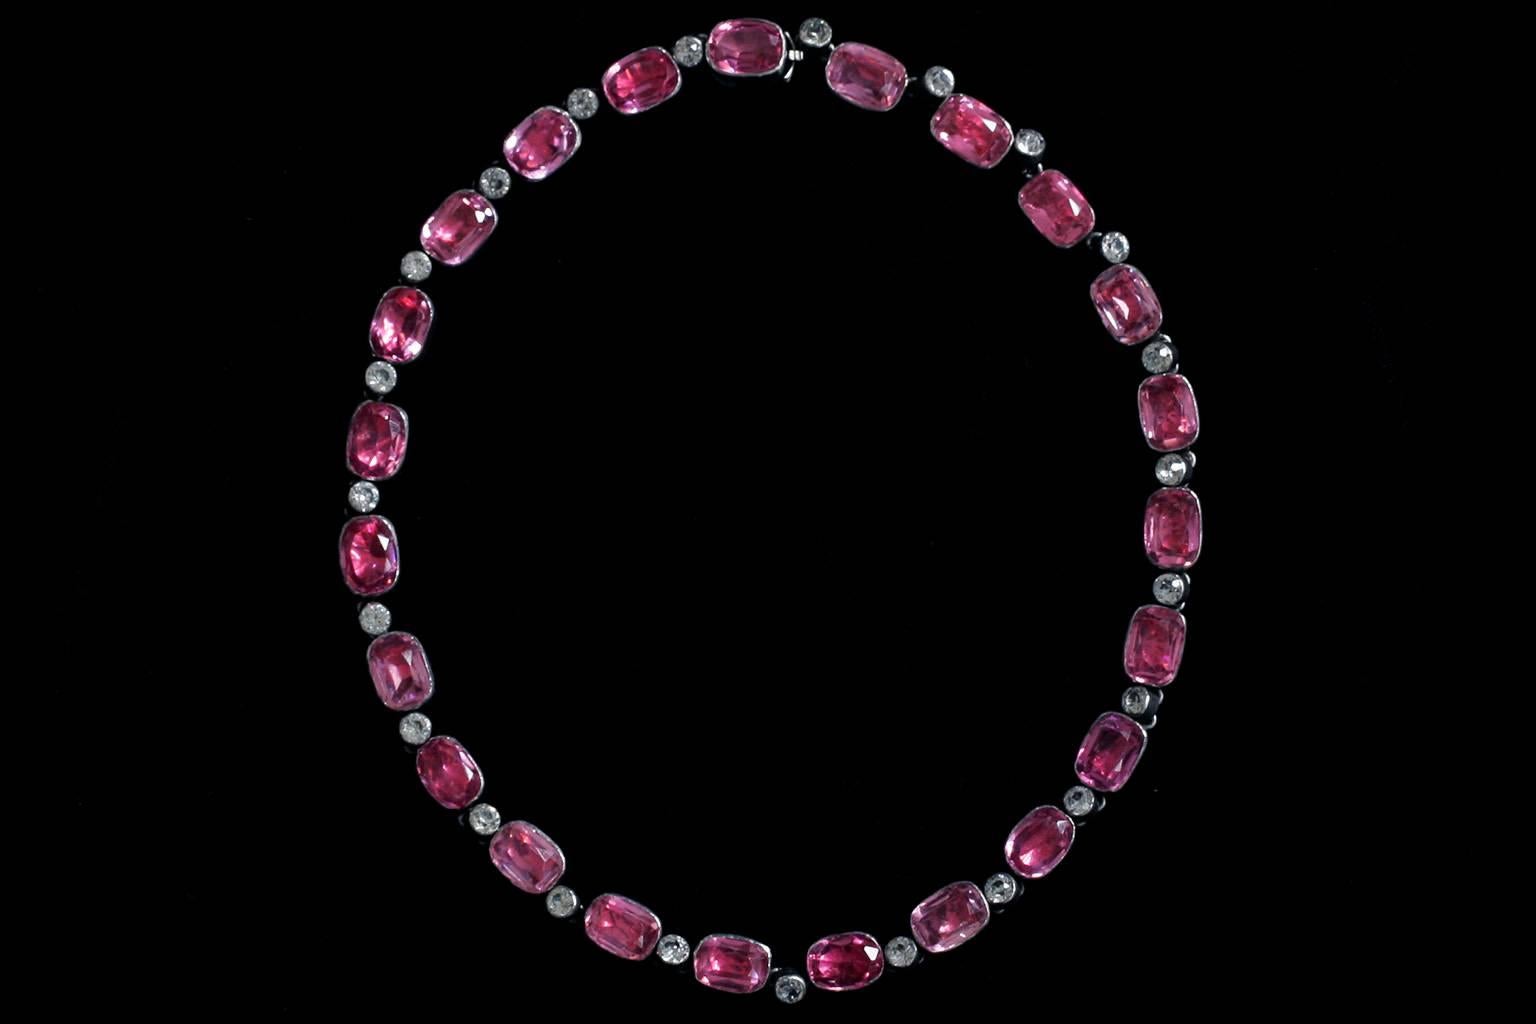 A very pretty late Edwardian/early Art Deco pink-and-white paste rivière necklace. Set in silver, each pink stone is vivid and bright, and the white diamond paste stones are colorless and clear. The necklace has a closed back setting, and contains